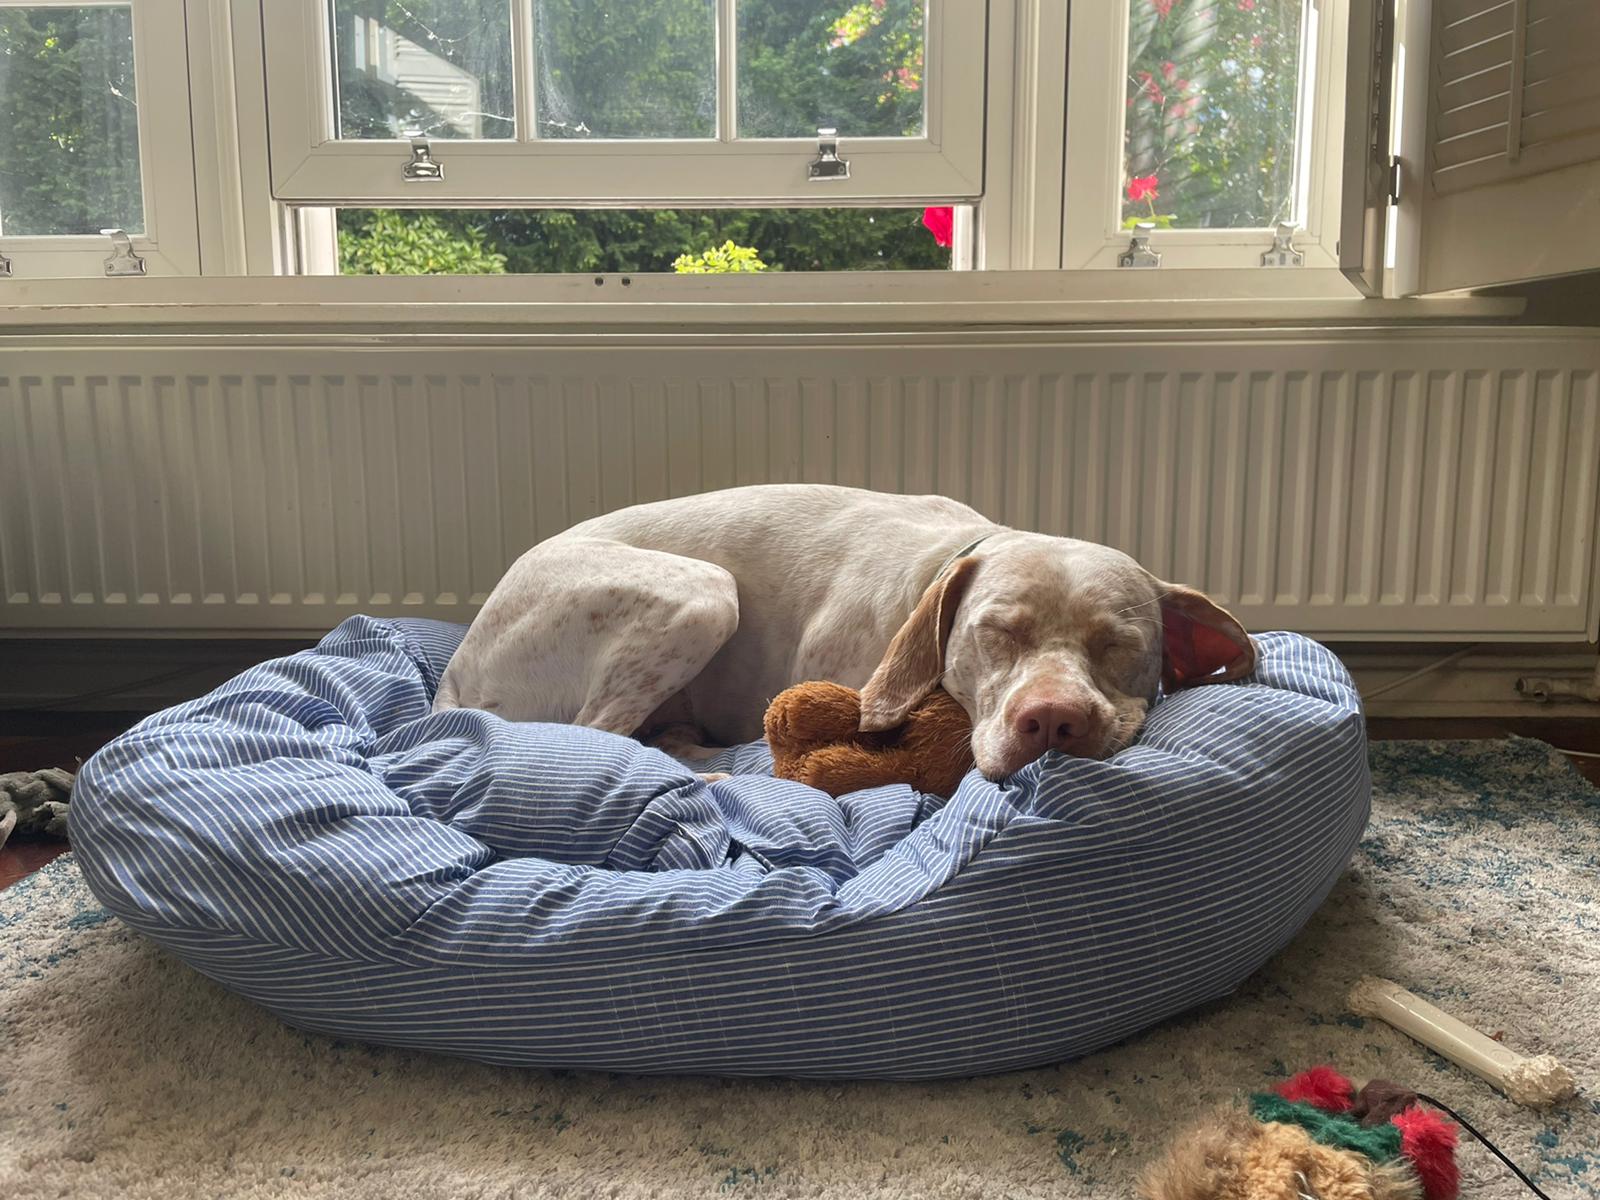 Bonnie curled up asleep on a big dog bed, her teddy being used as a pillow.